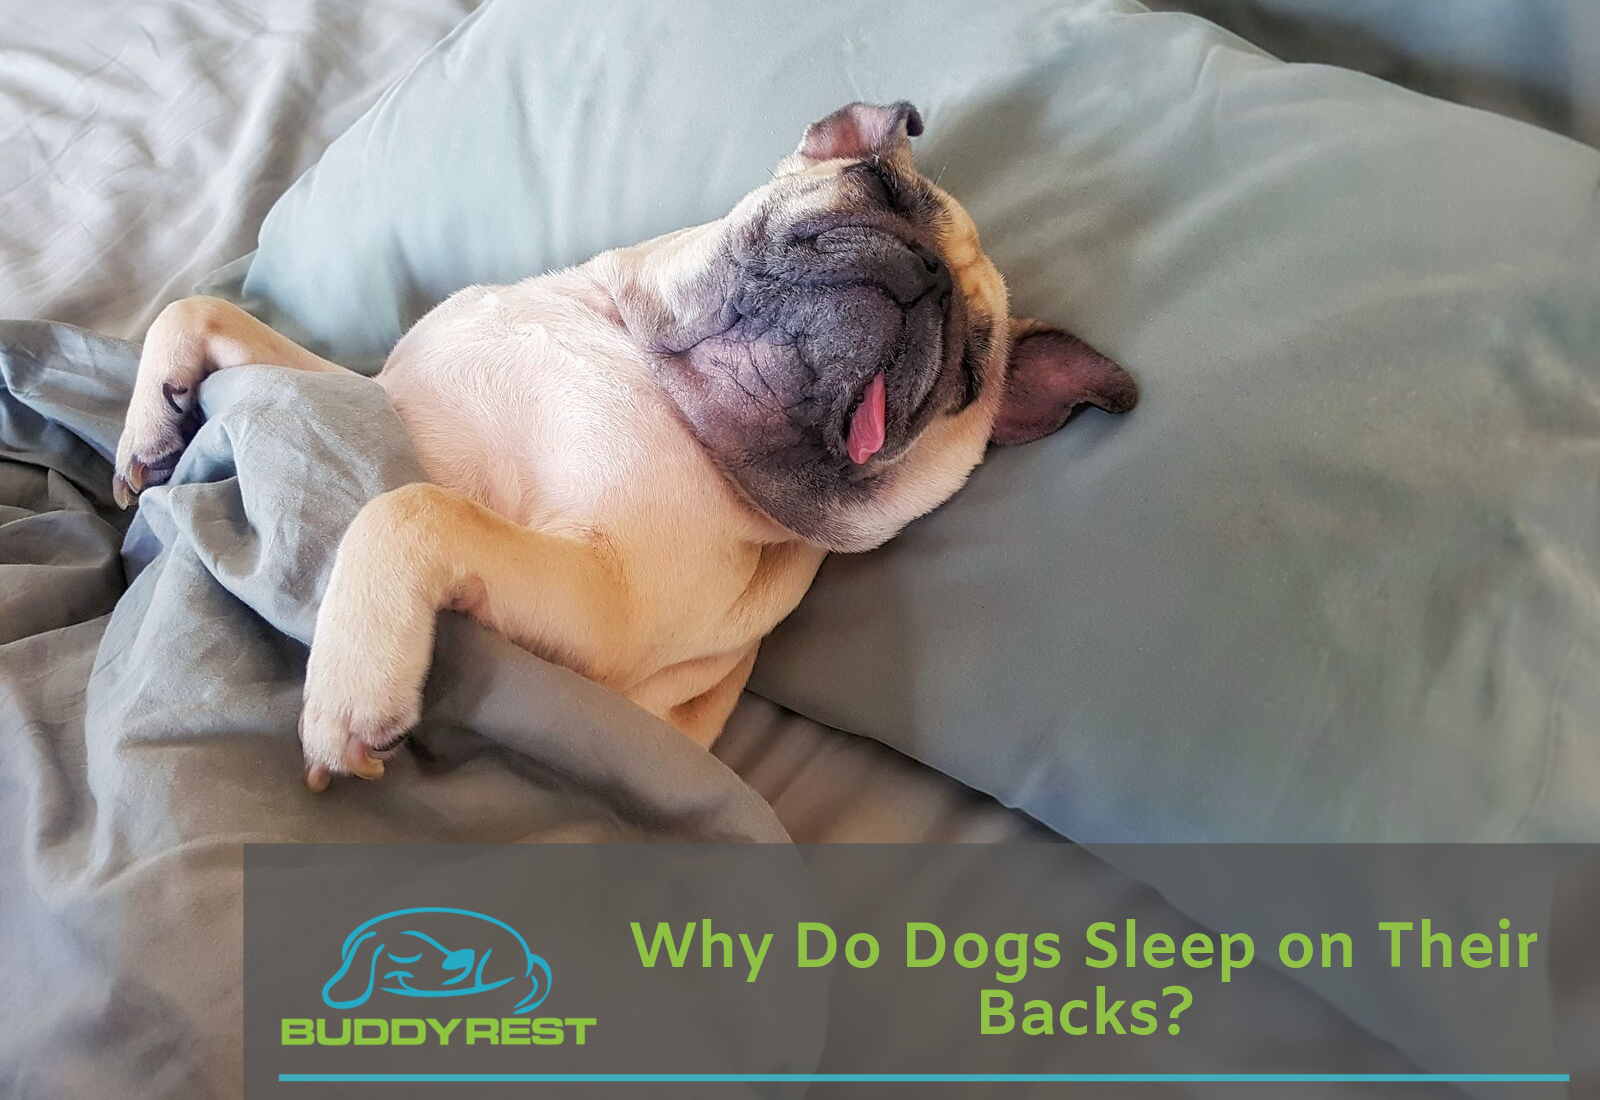 why do dogs limp after sleeping